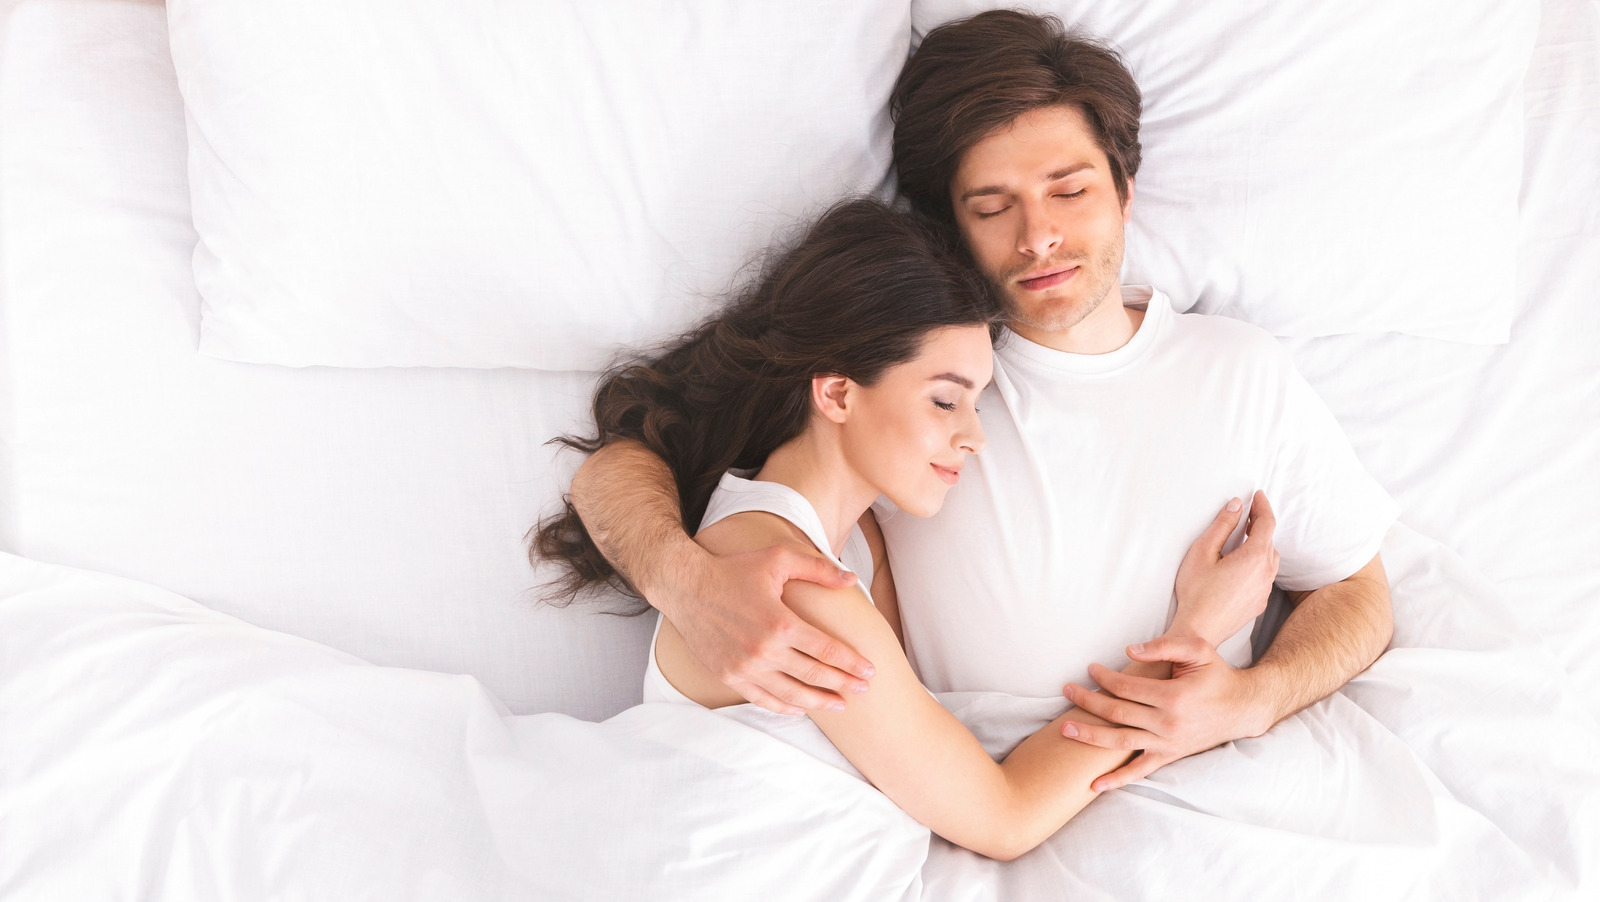 How Men And Women Dream Differently